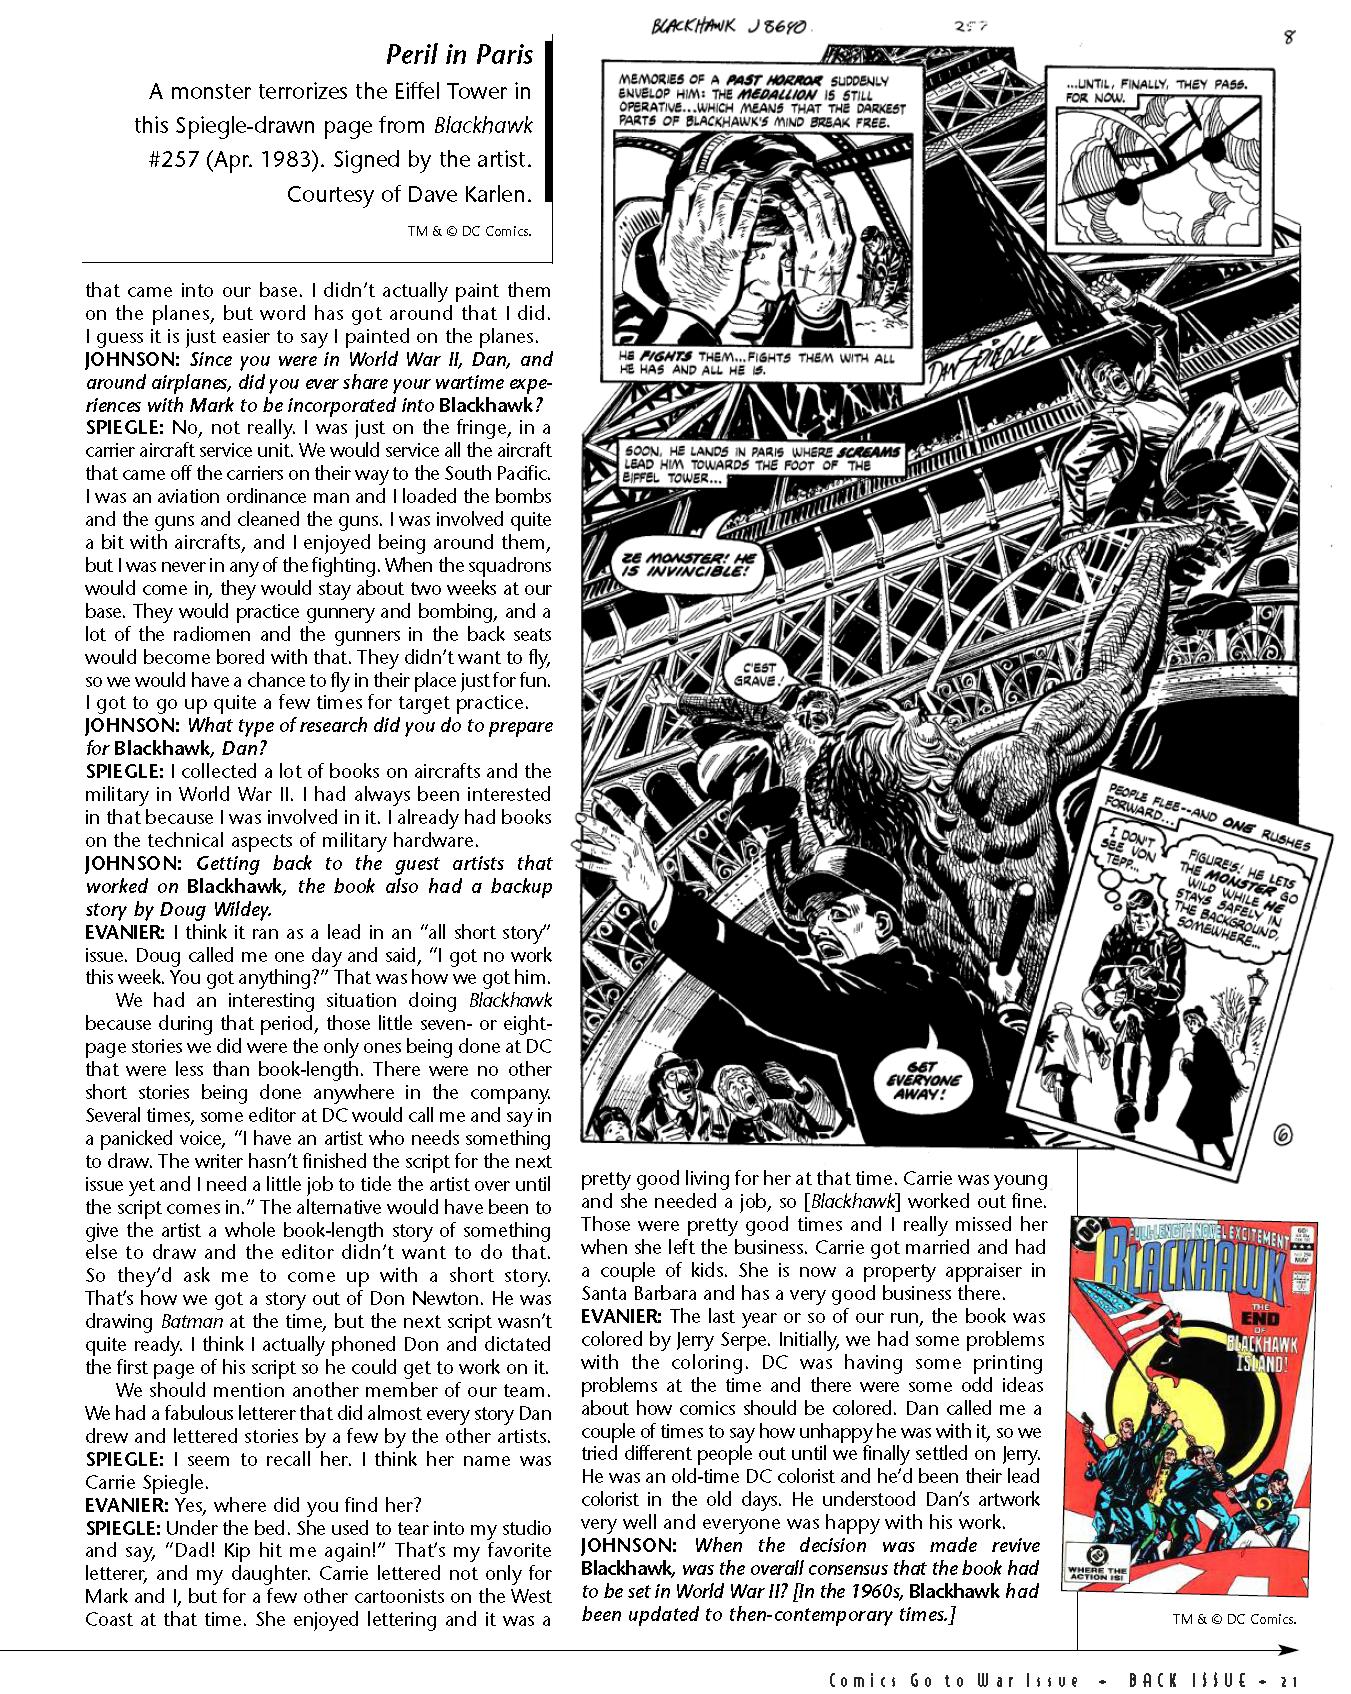 Read online Back Issue comic -  Issue #37 - 23